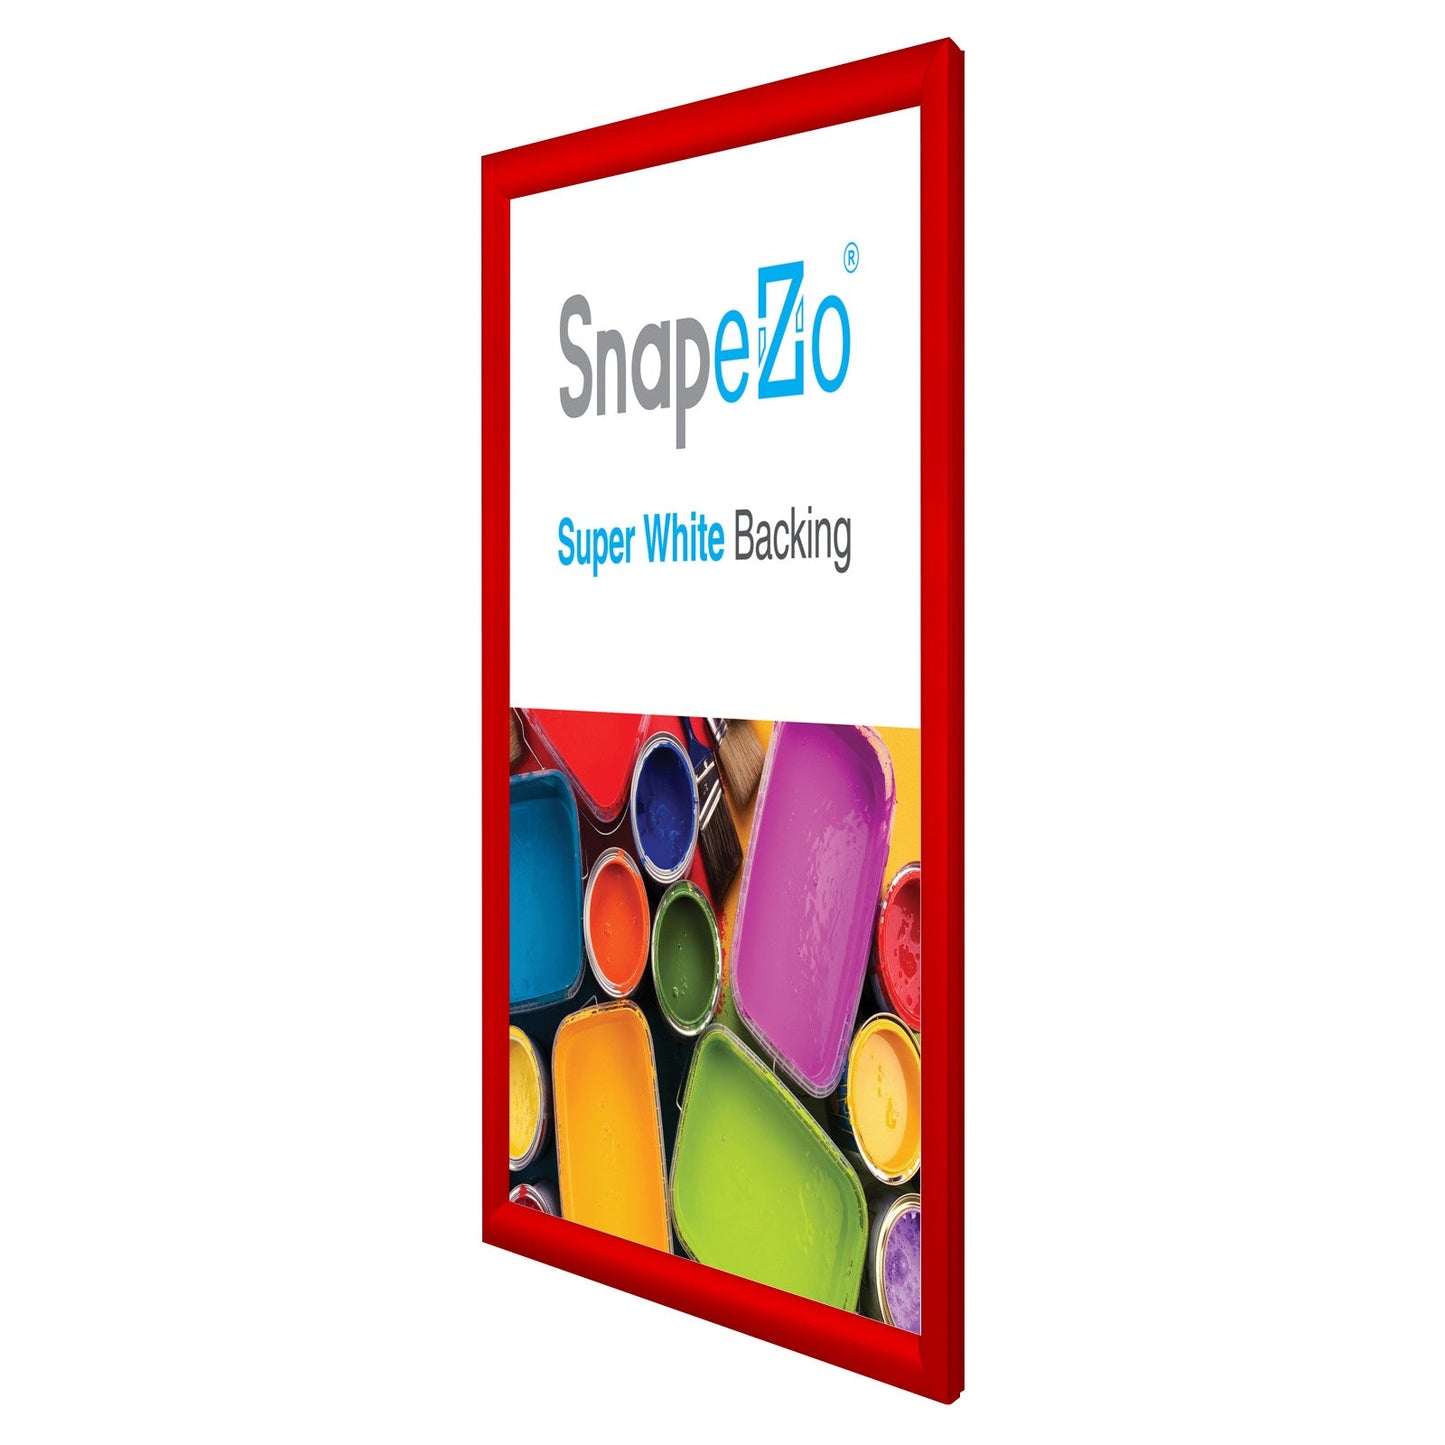 Load image into Gallery viewer, 15x20 Red SnapeZo® Snap Frame - 1.2&amp;quot; Profile
